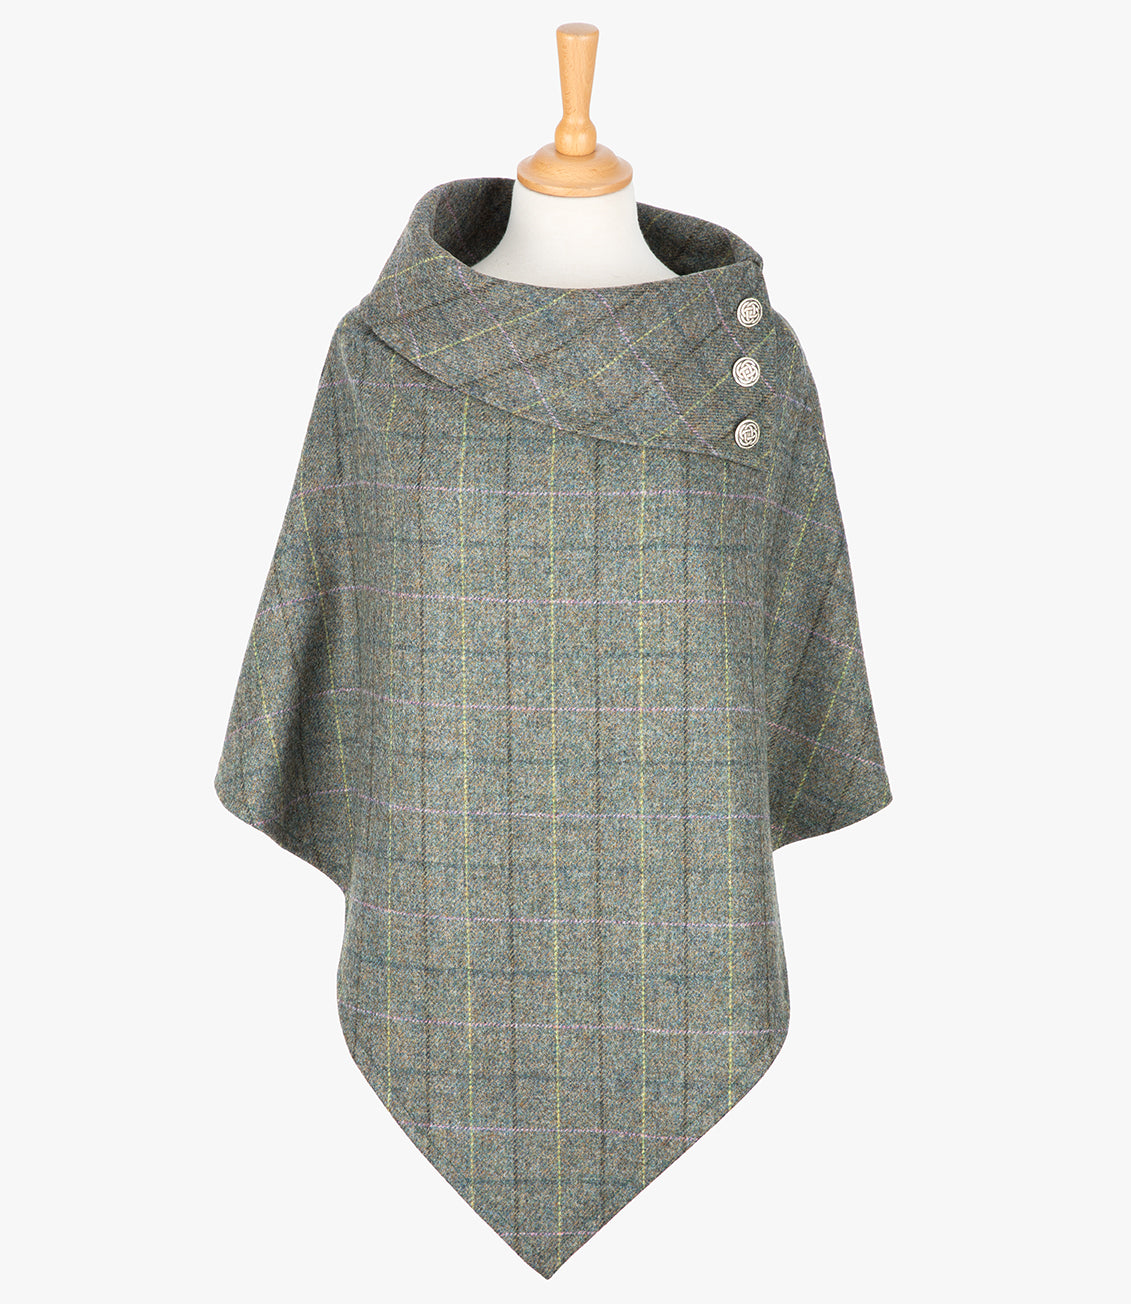 Tweed poncho in grey check. It drops over the head and drapes gently over the shoulders. The colour is grey check with a black, yellow, pink and blue overcheck. It comes mid-way down the arms and finishes at a point at the front. It has a folded collar 3 Celtic buttons in silver on the right hand side.